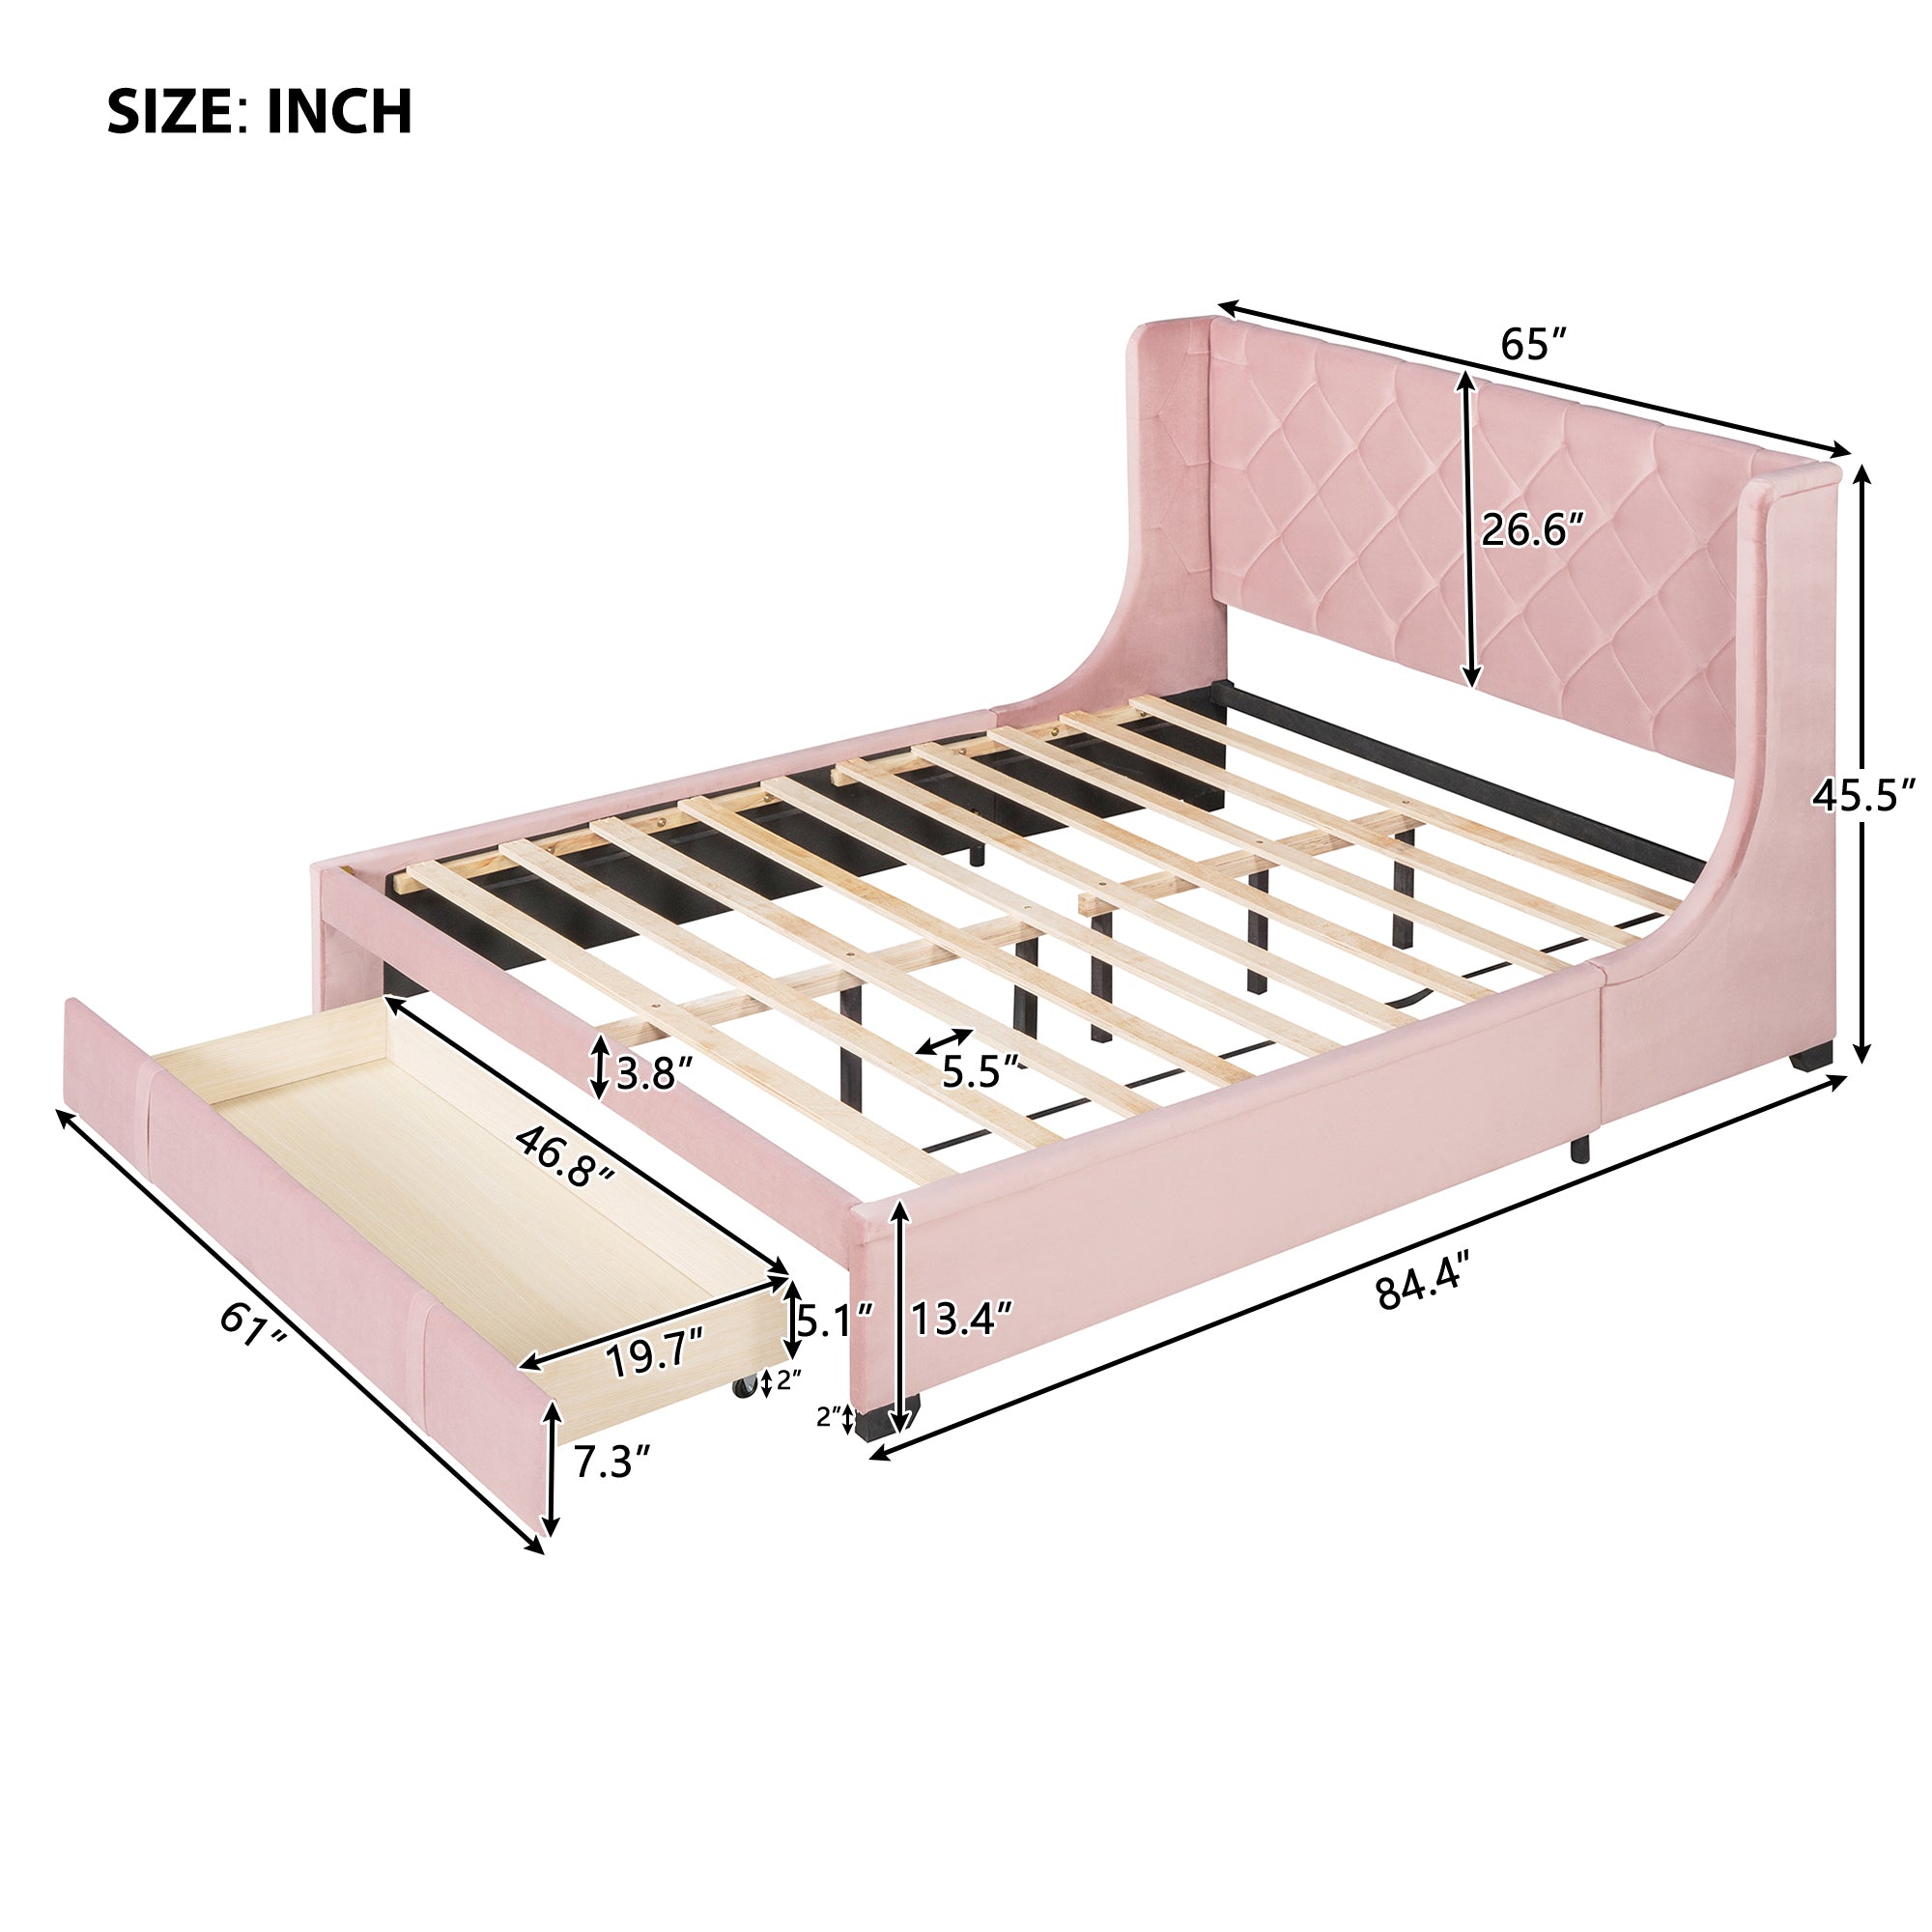 Queen Size Storage Bed Velvet Upholstered Platform Bed with Wingback Headboard and a Big Drawer - Pink